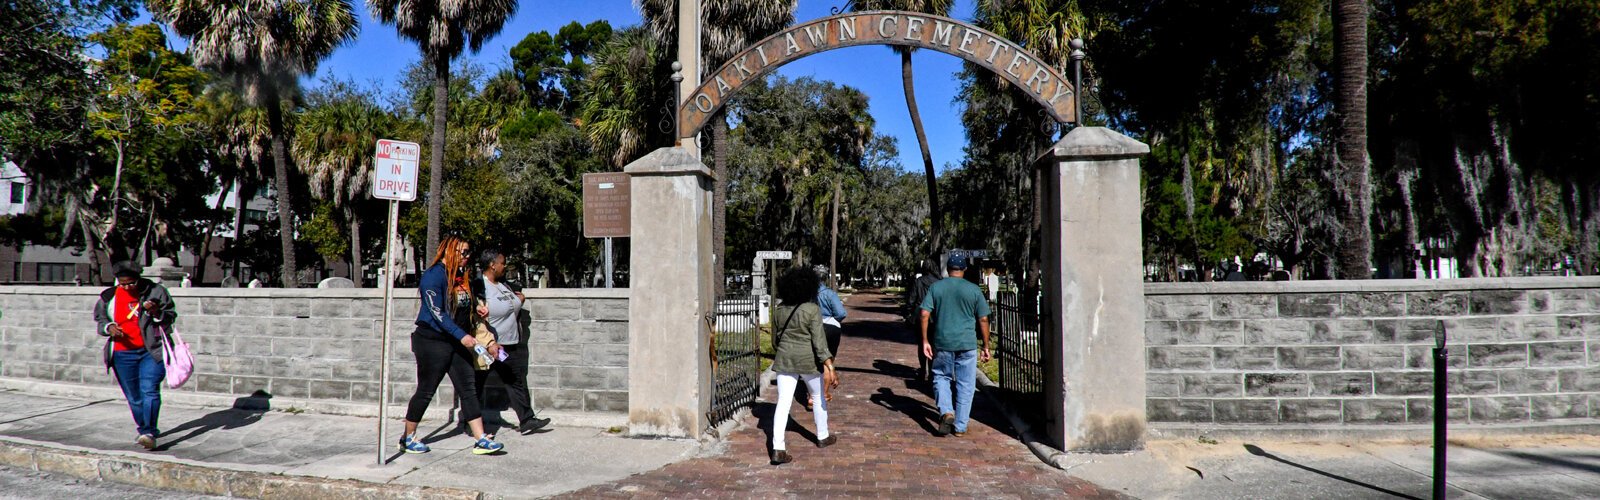 Tampa’s first public cemetery, Oaklawn Cemetery, opened in 1859 and now contains some 1,700 graves, all rigidly located according to race and social status. It was added to the National Register of Historic Places in 2017.